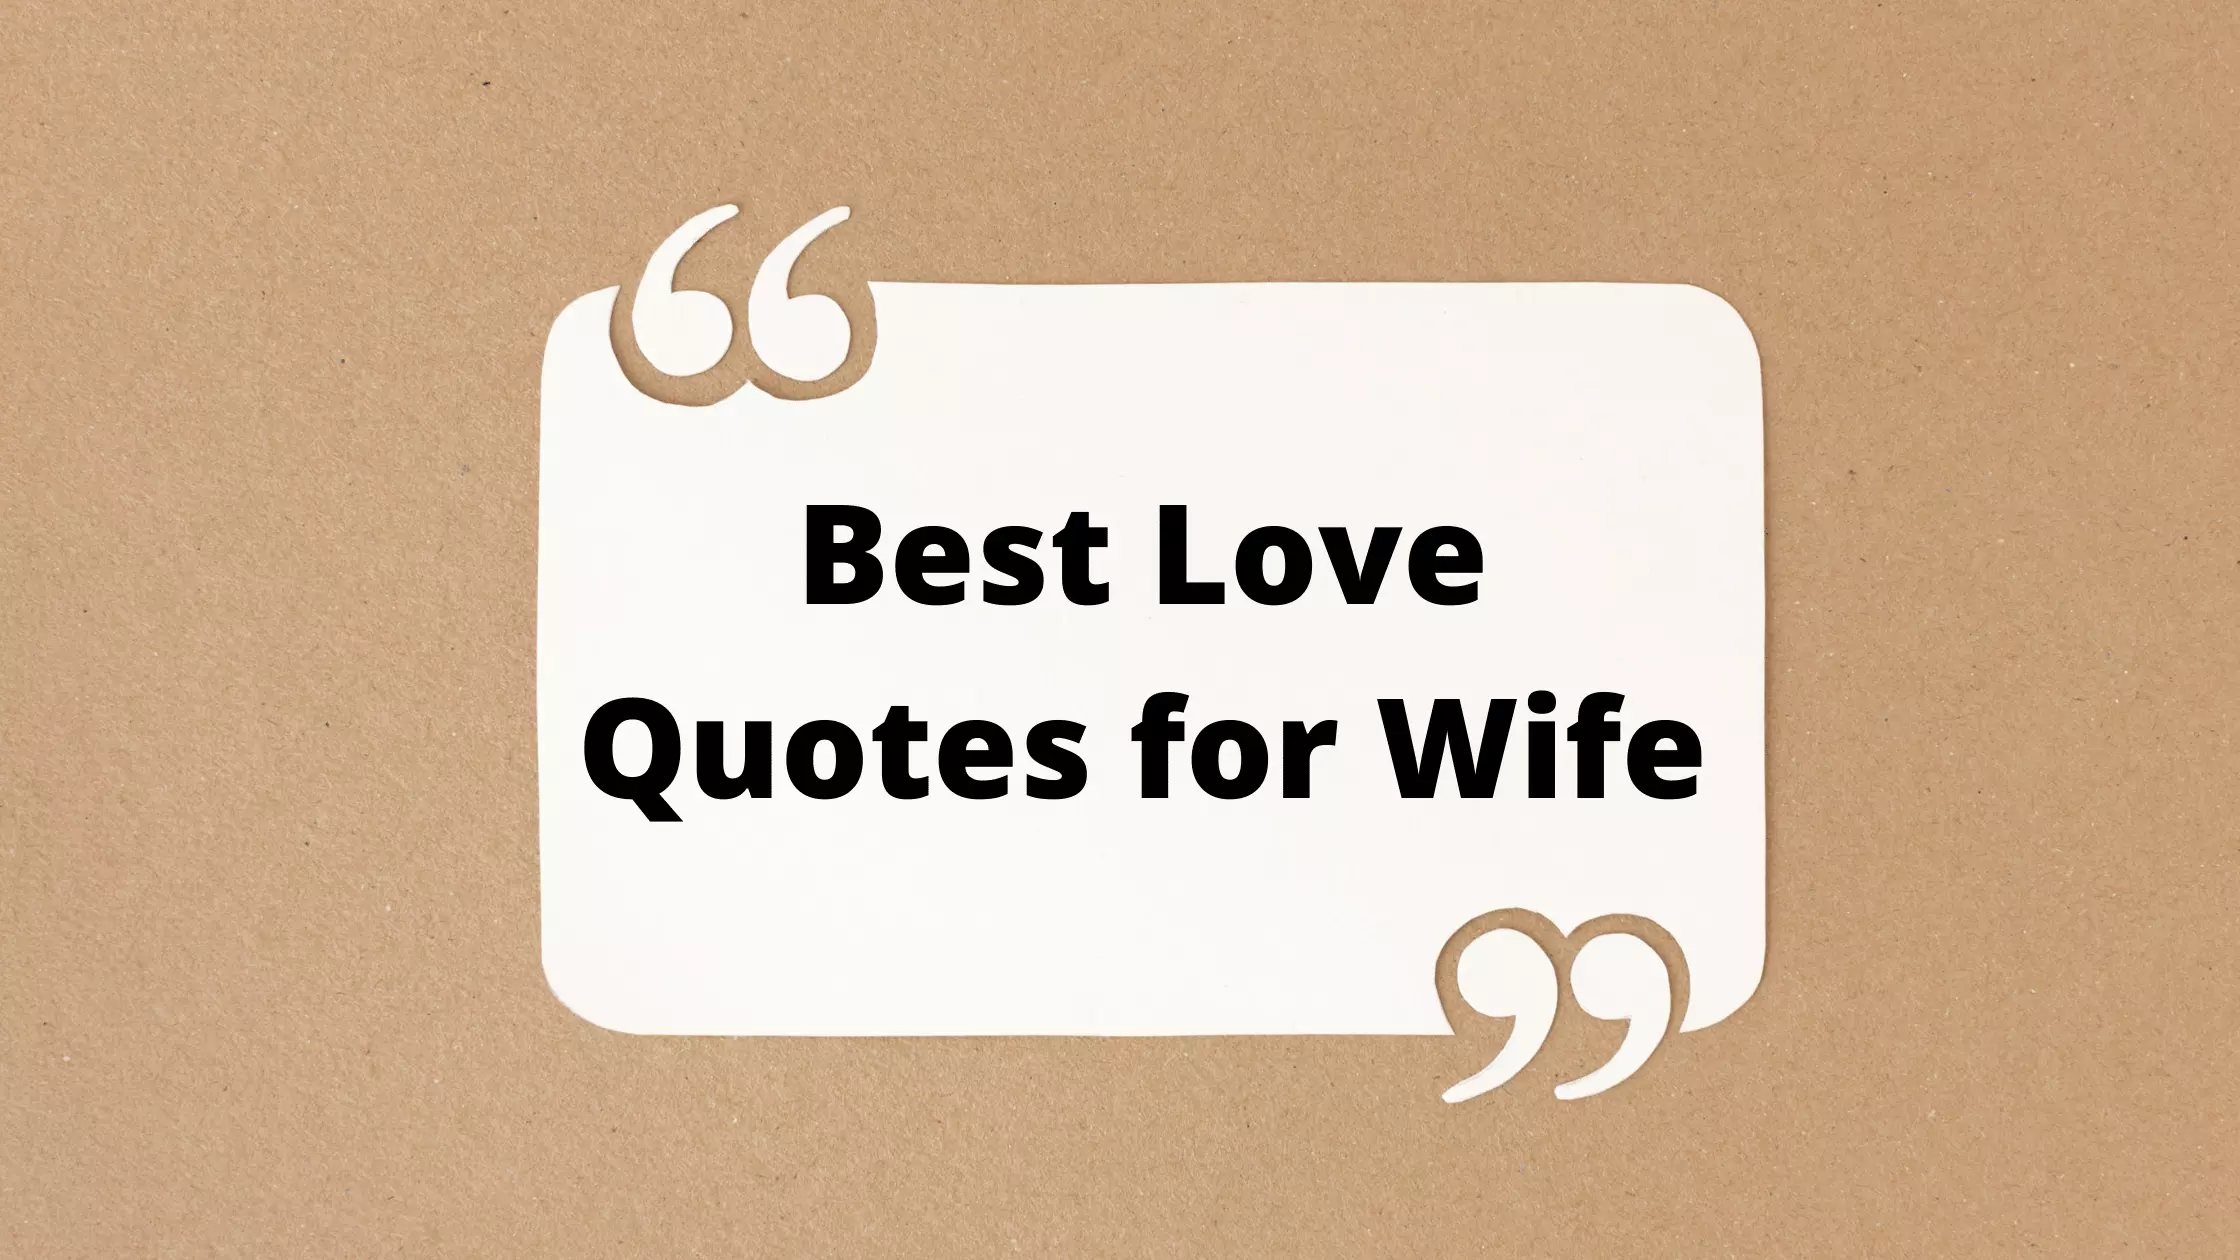 Lovely Quotes for Your Spouse/Wife - Ultimate List of Wishes